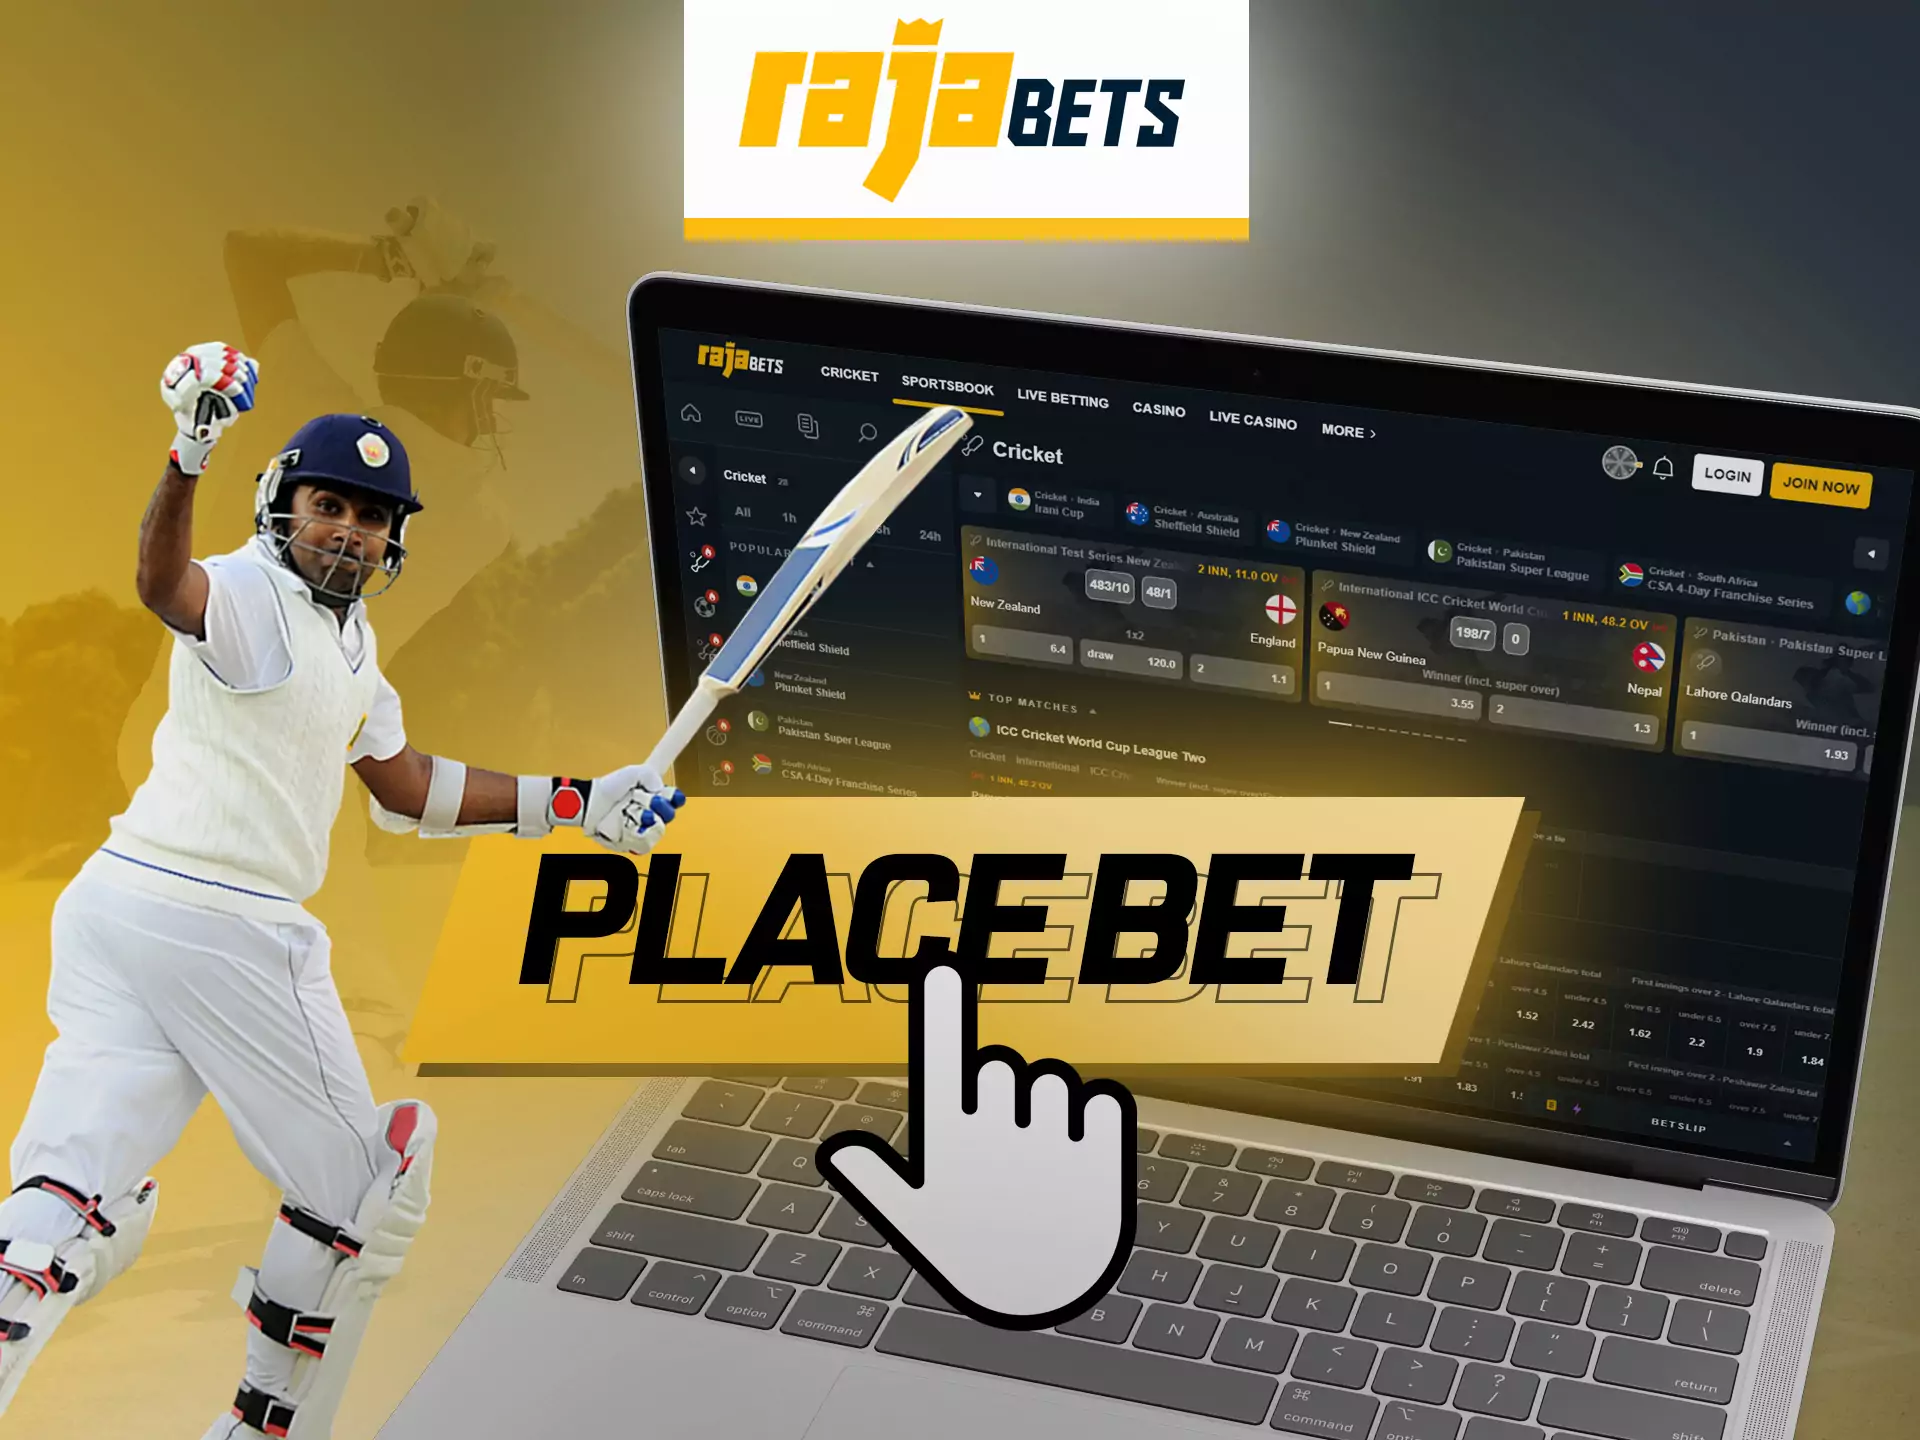 With these instructions, learn how easy it is for you to bet on Rajabets.